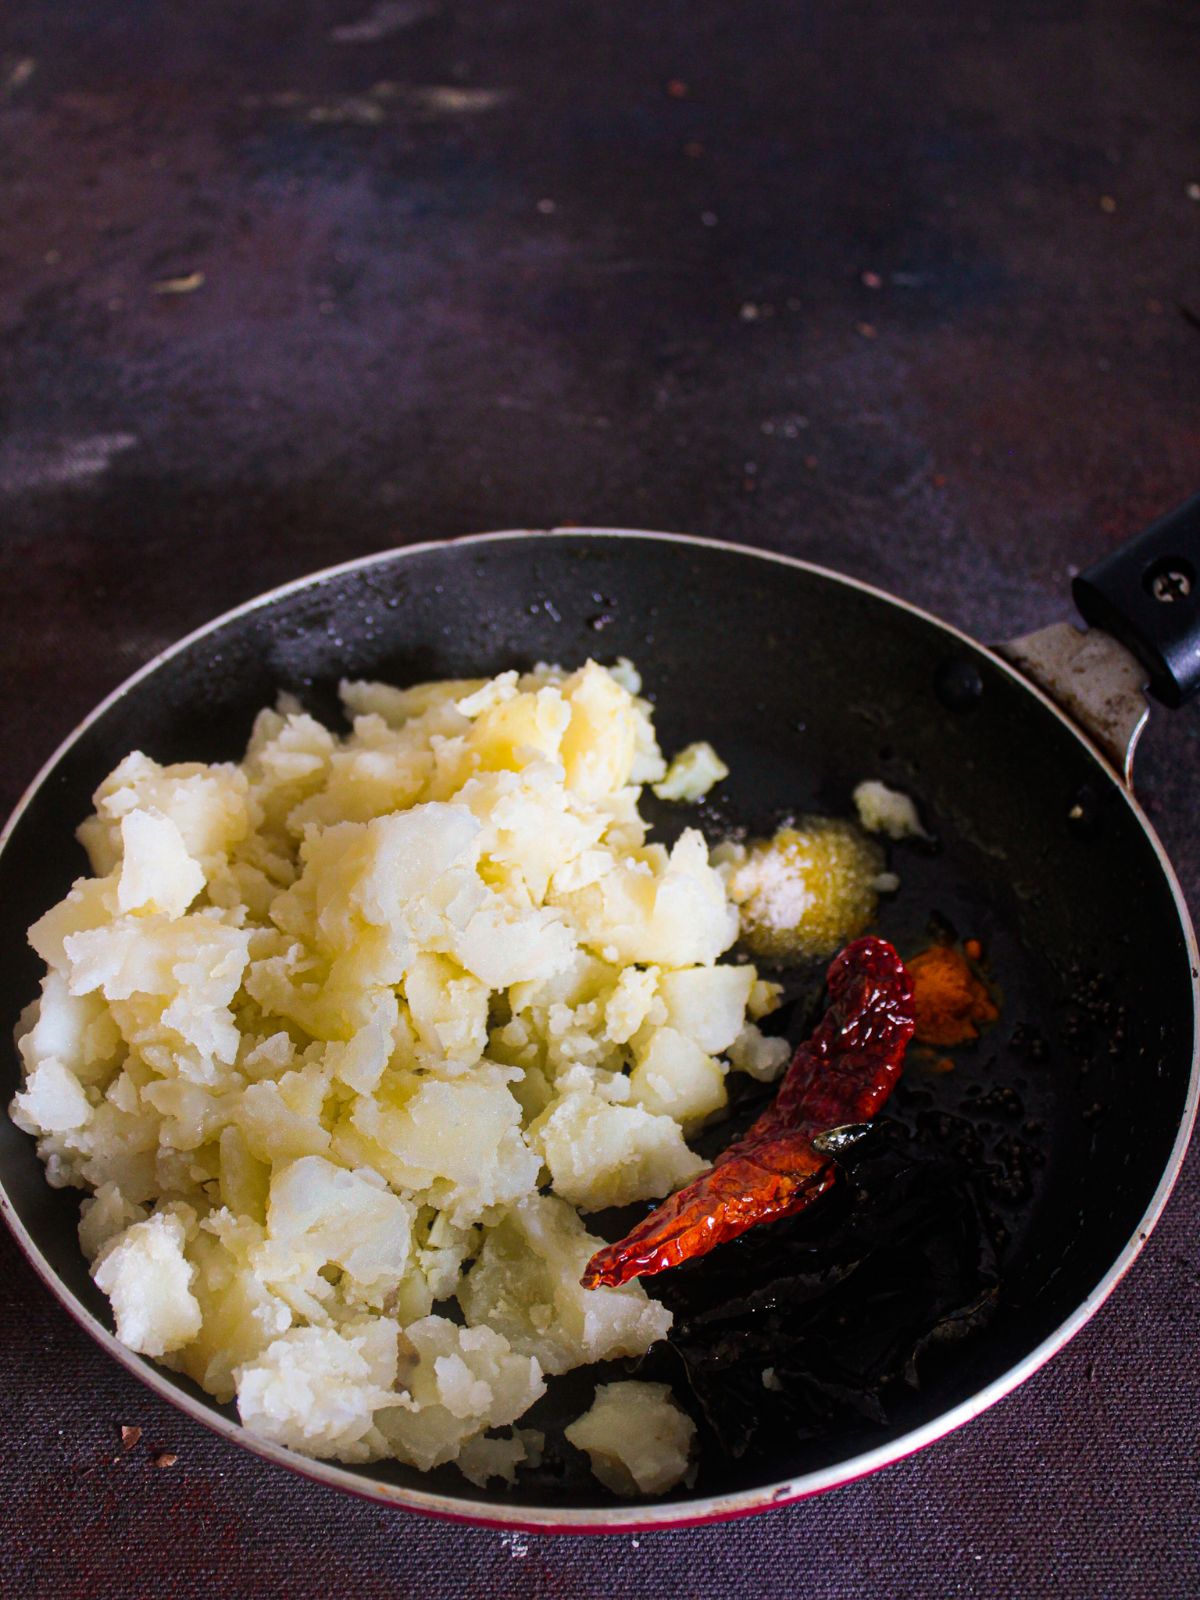 Skillet of mashed potatoes with red chili